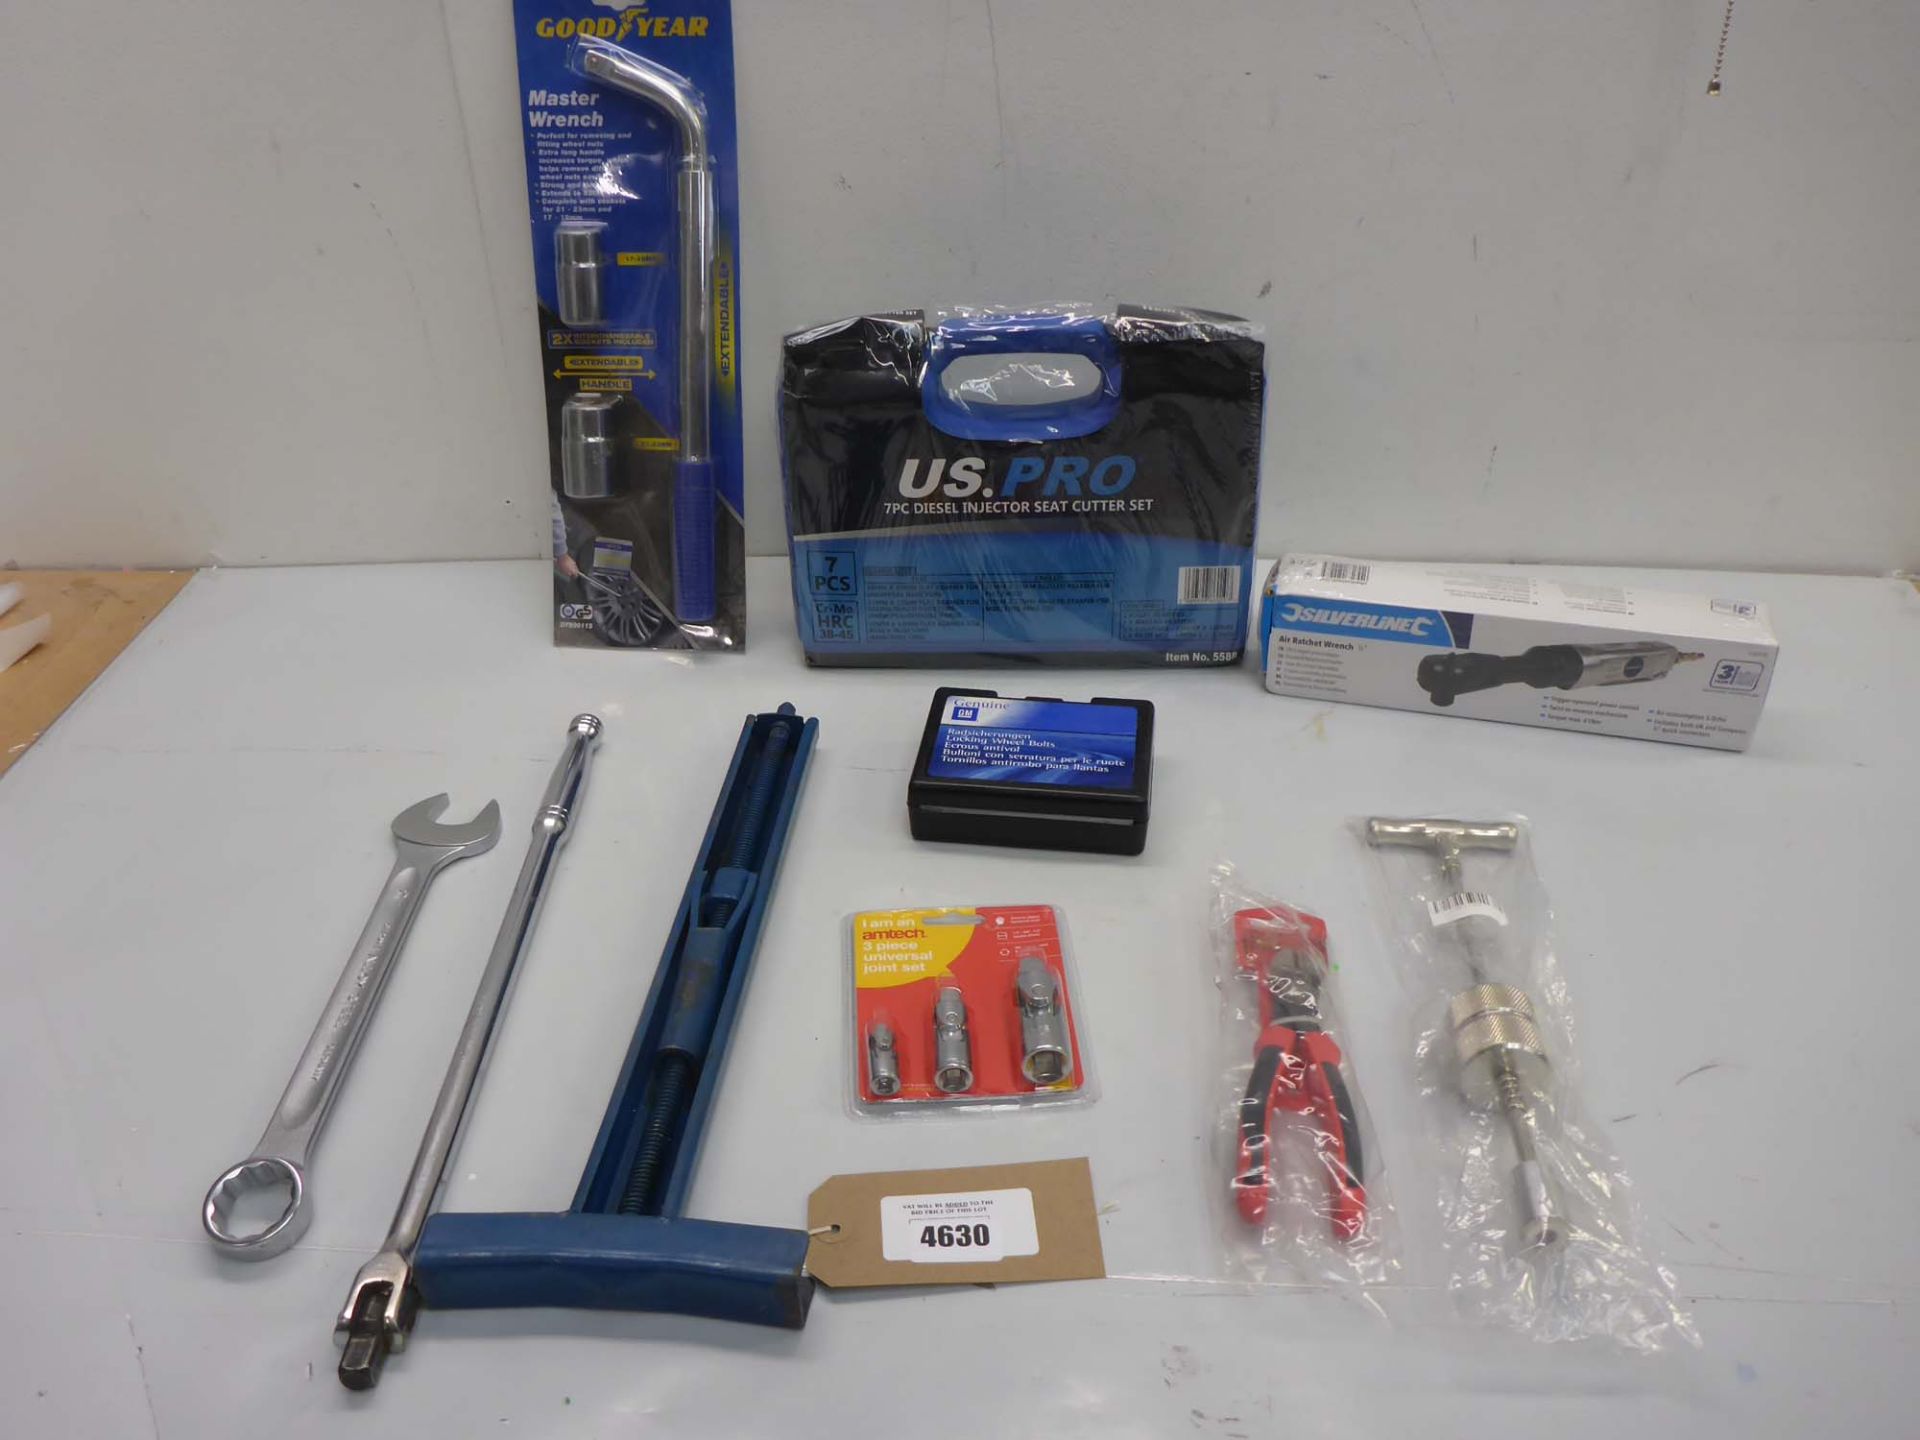 Master wrench, Diesel injector seat cutter set, Air ratchet wrench, spanner, pliers, wheel bolts and